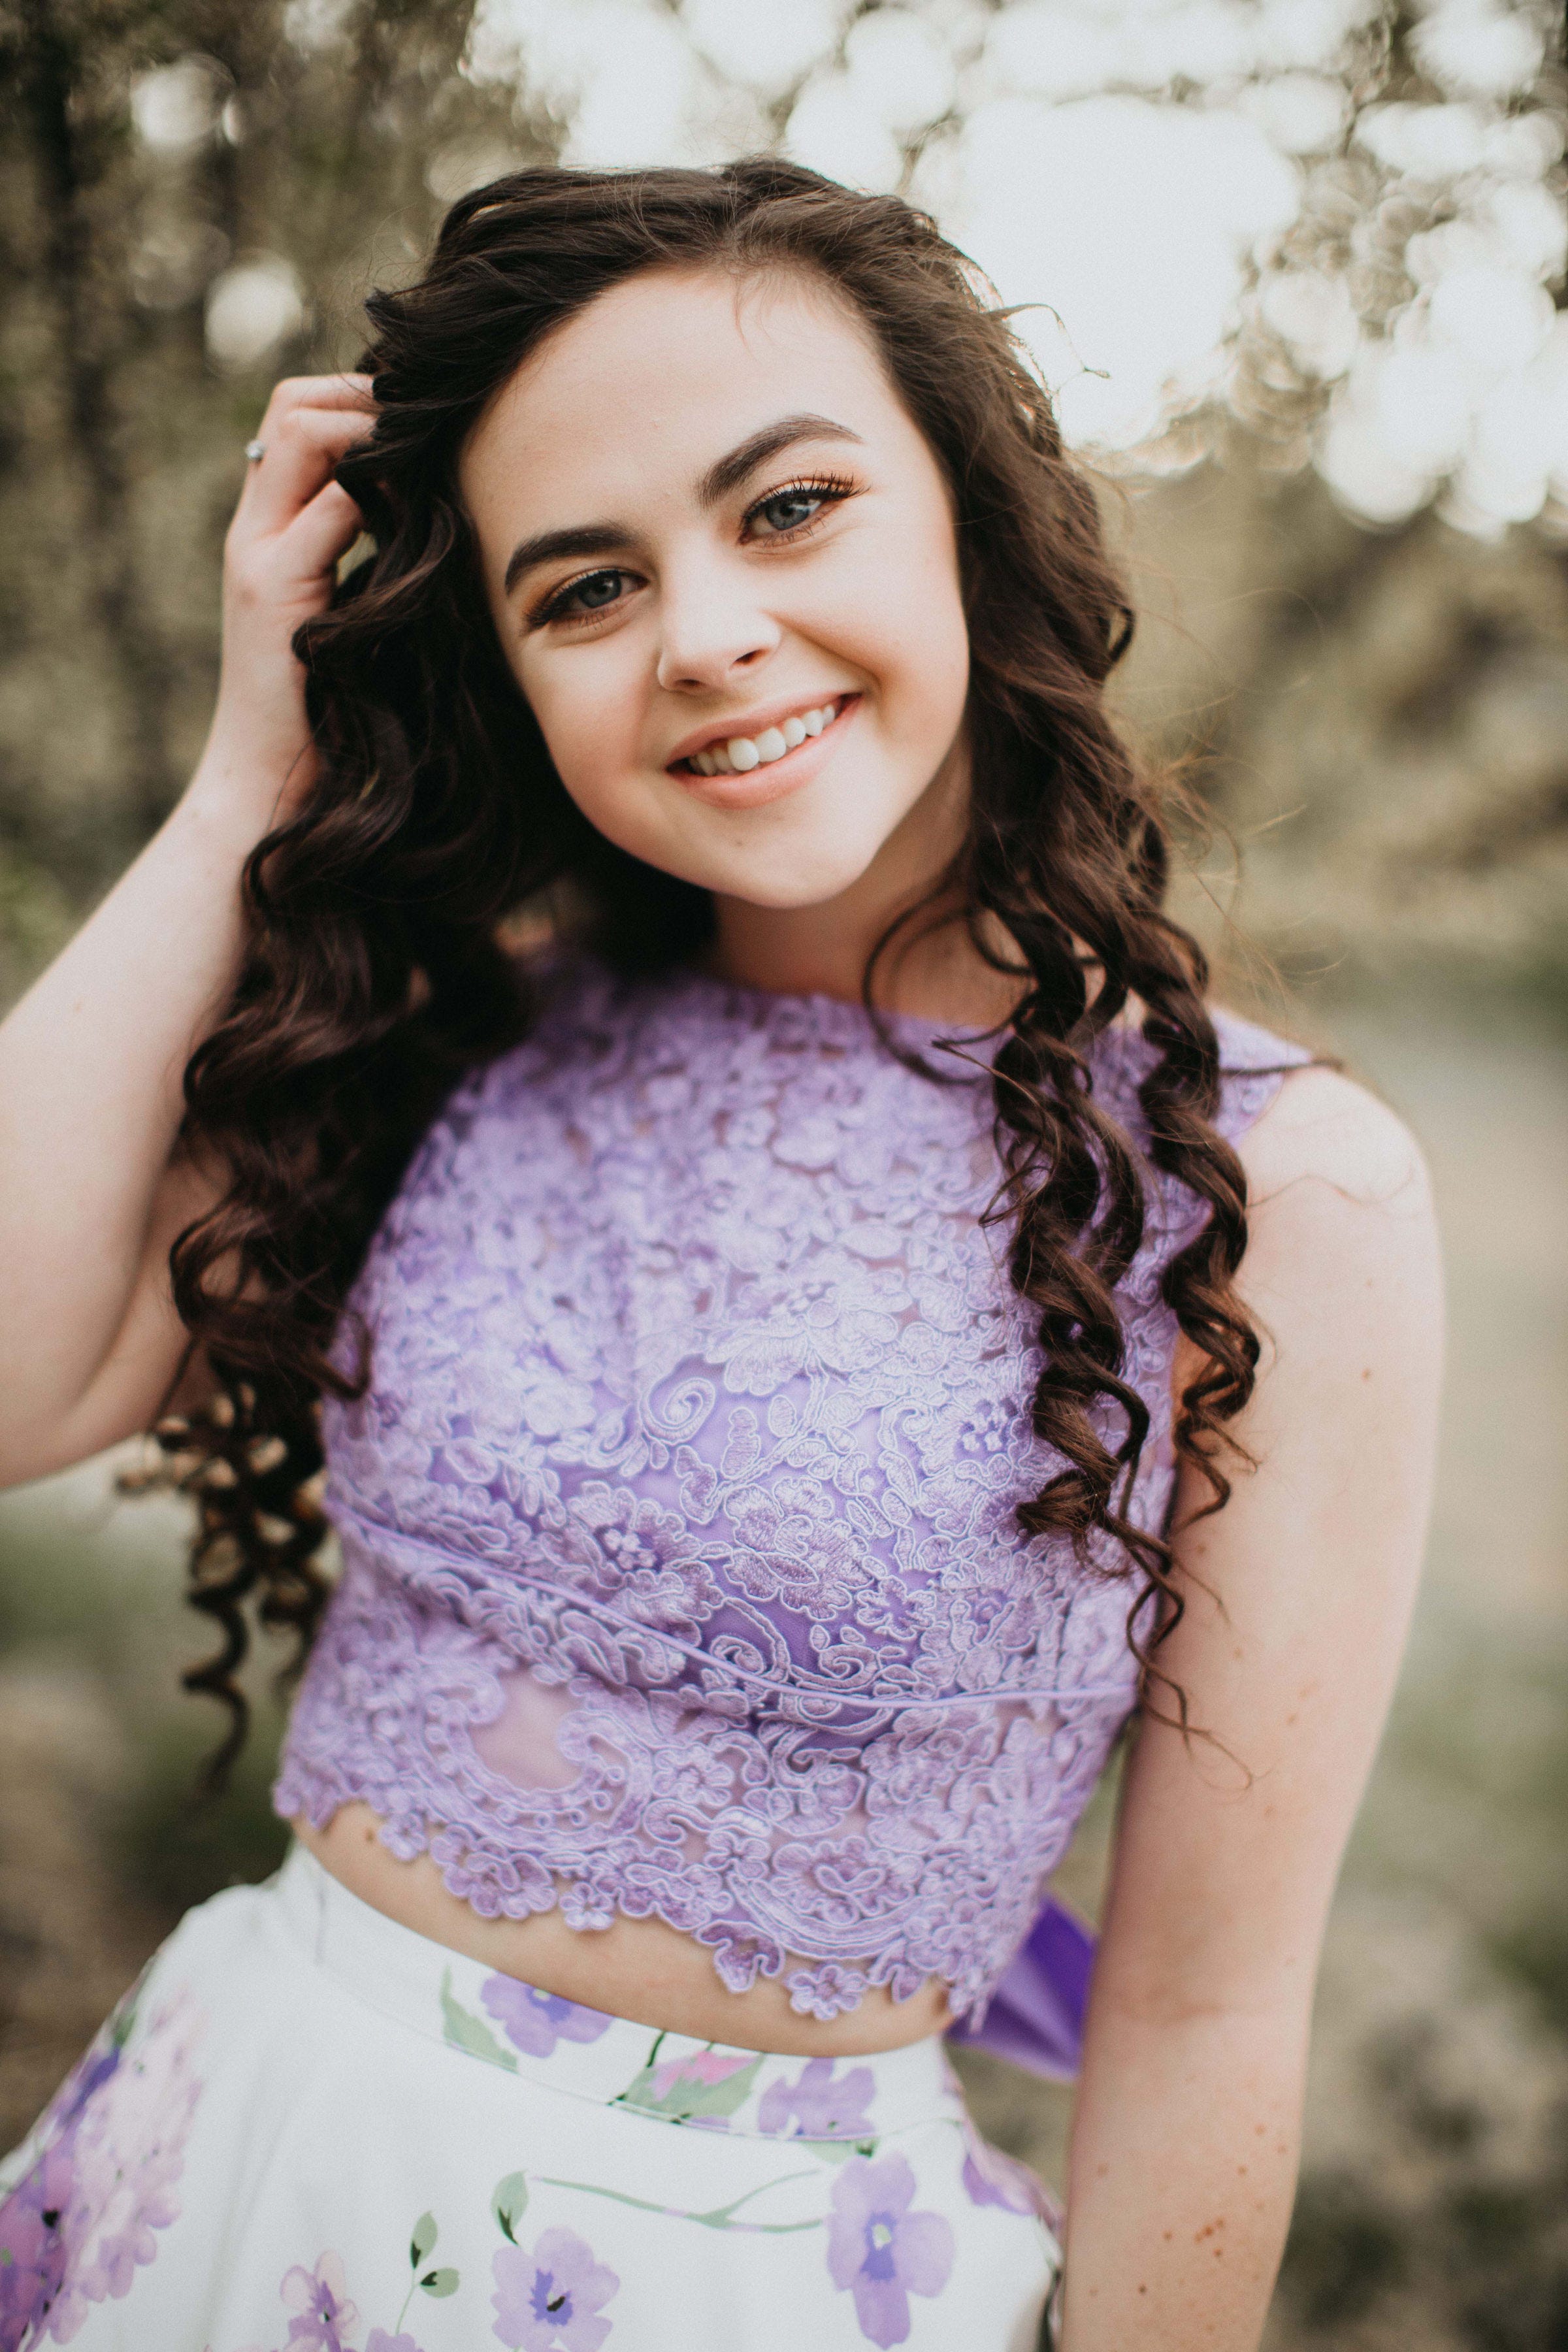 Farmington's Chevel Shepherd has a lot planned for the new year, including a hometown concert, the release of her first recording, the release of her first film and her high school graduation.